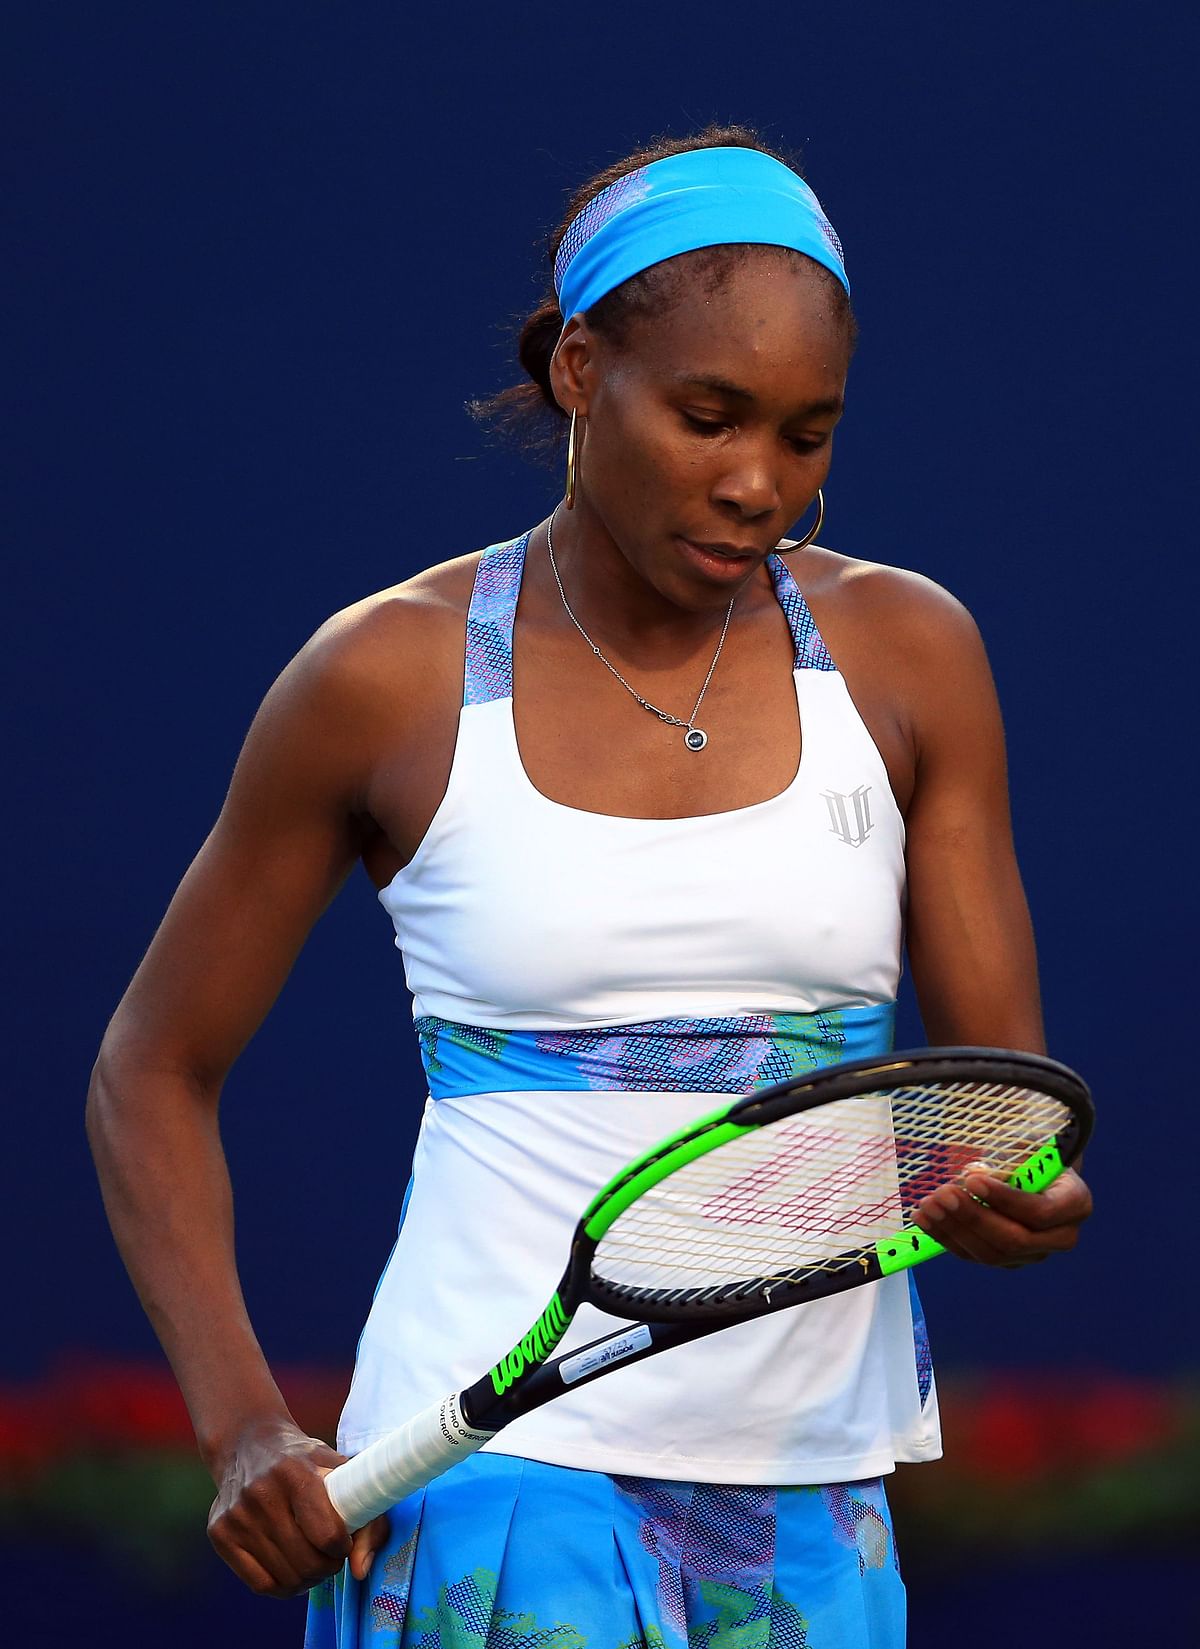 Venus Williams of the United States checks her racket in a match against Elina Svitolina of Ukraine during Day 6 of the Rogers Cup at Aviva Centre on August 10, 2017 in Toronto, Canada. AFP